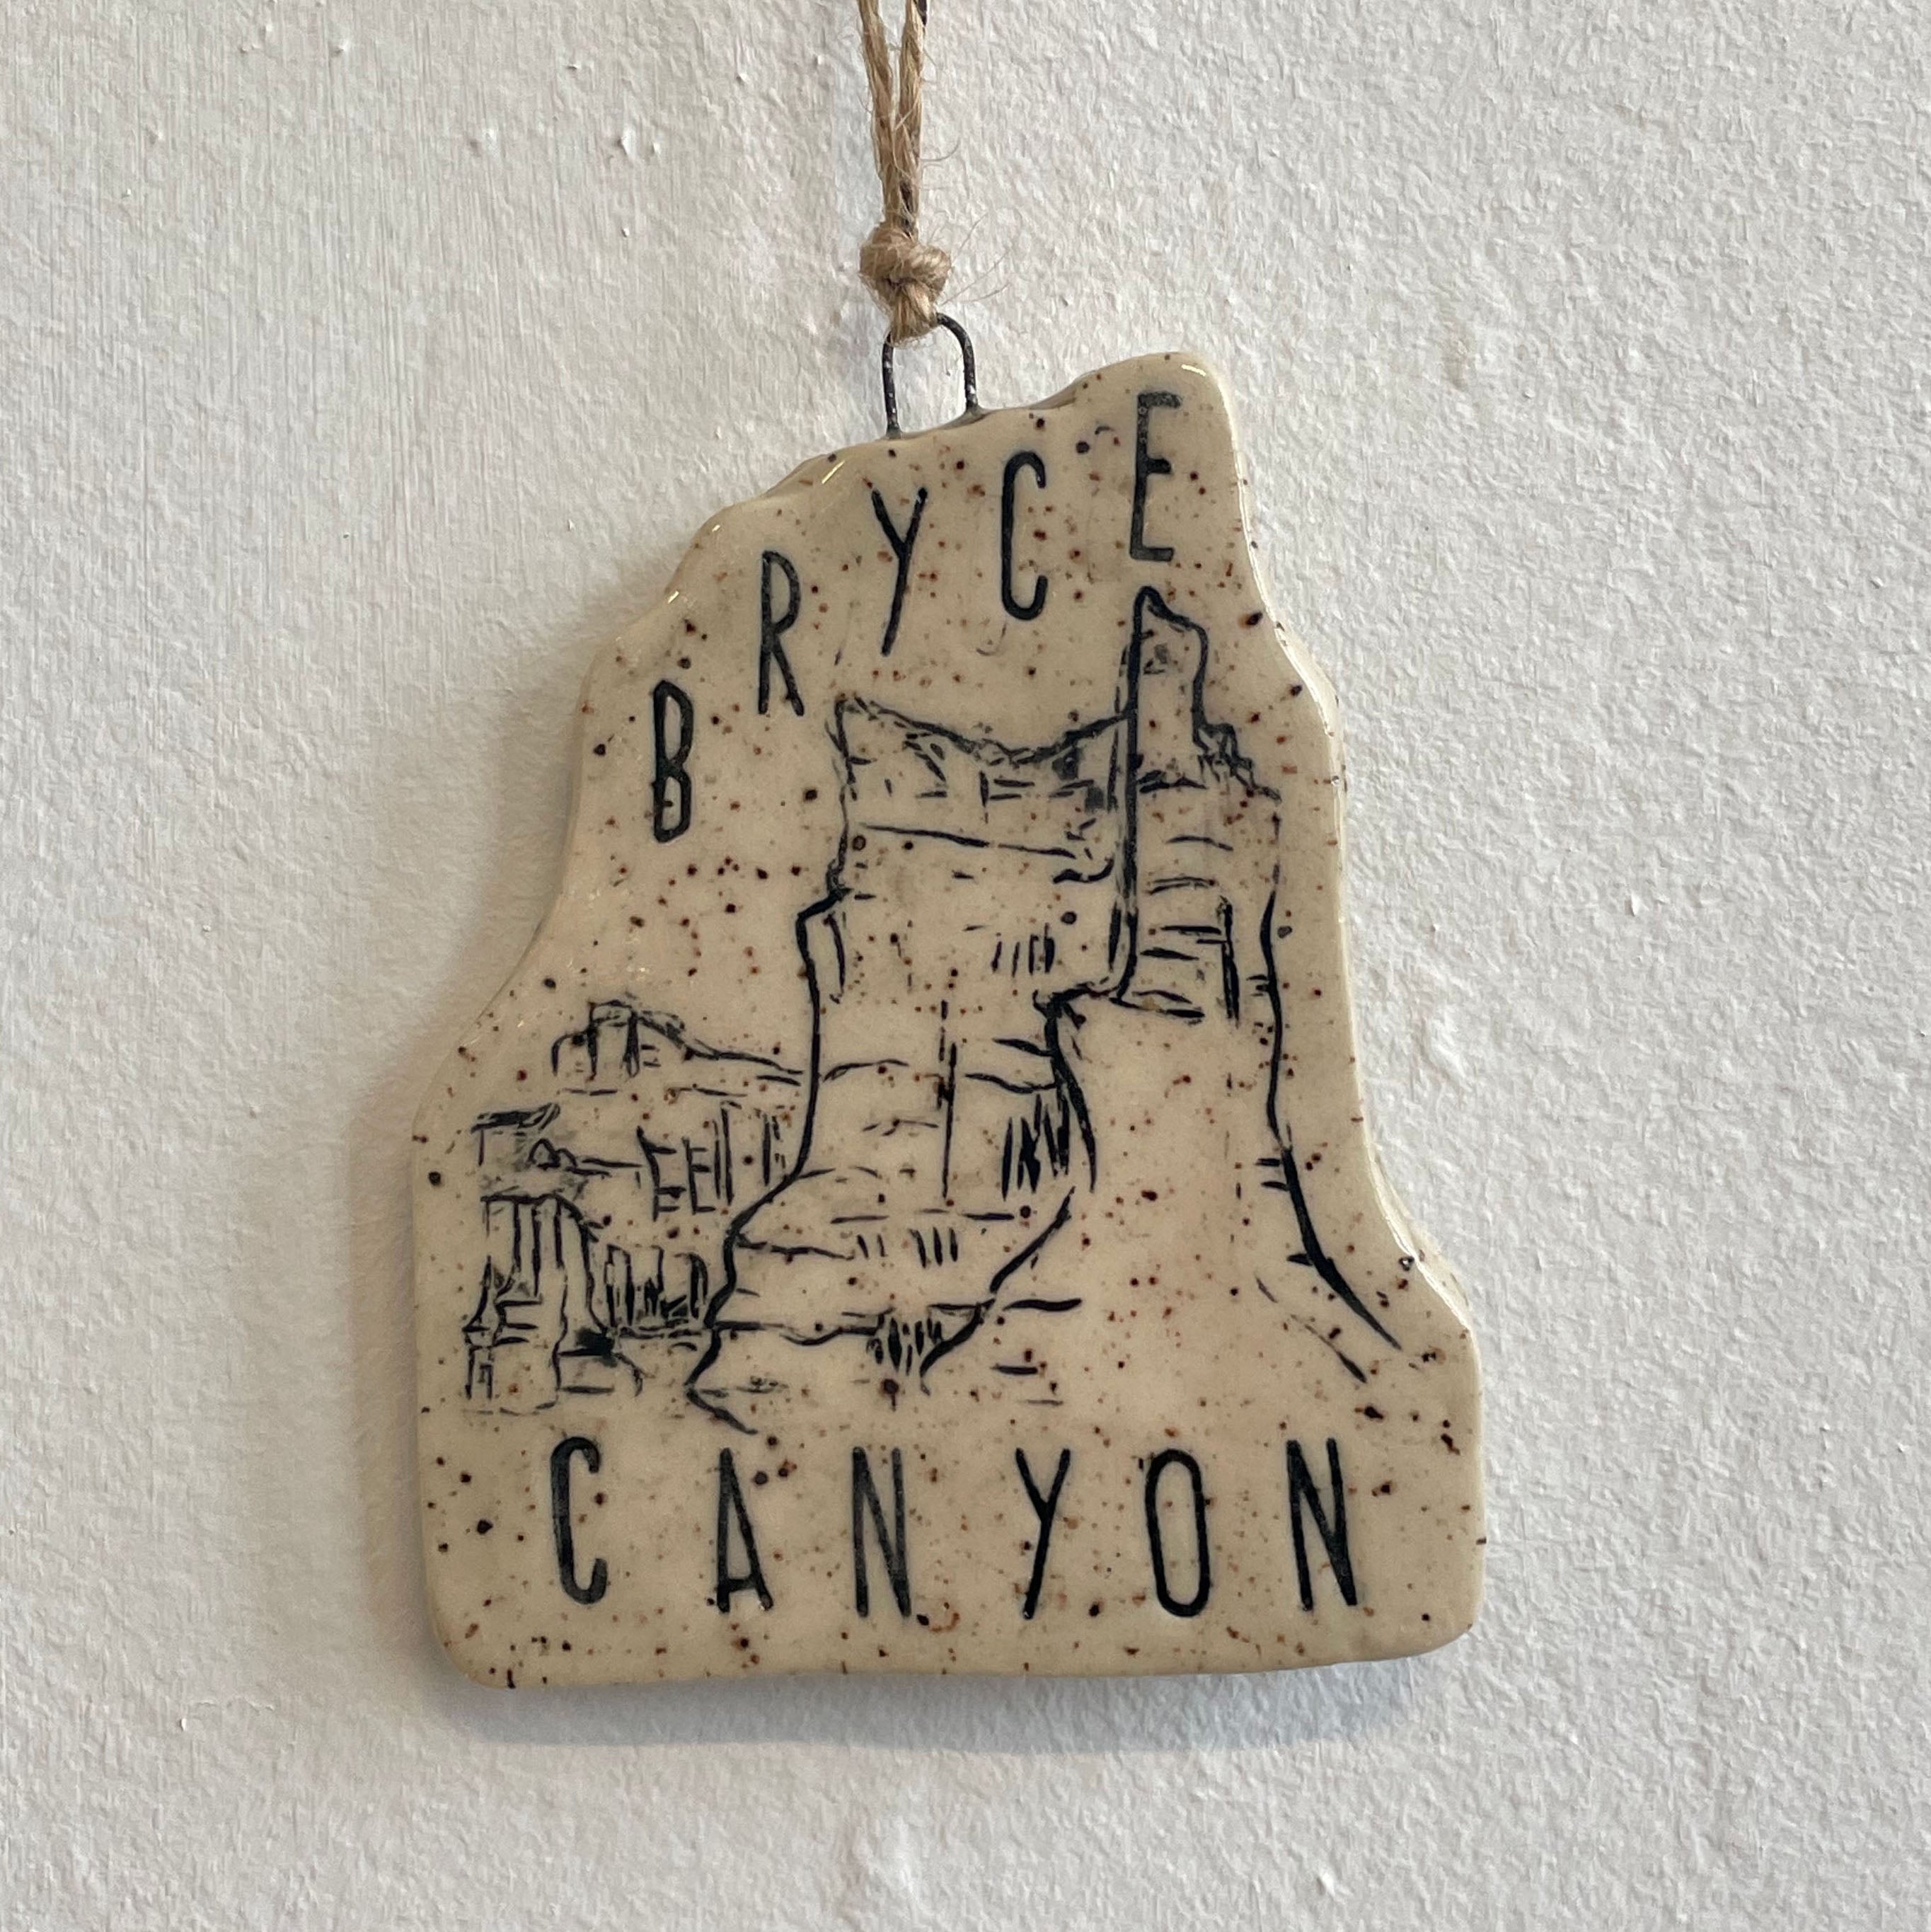 Bryce Canyon Ornament